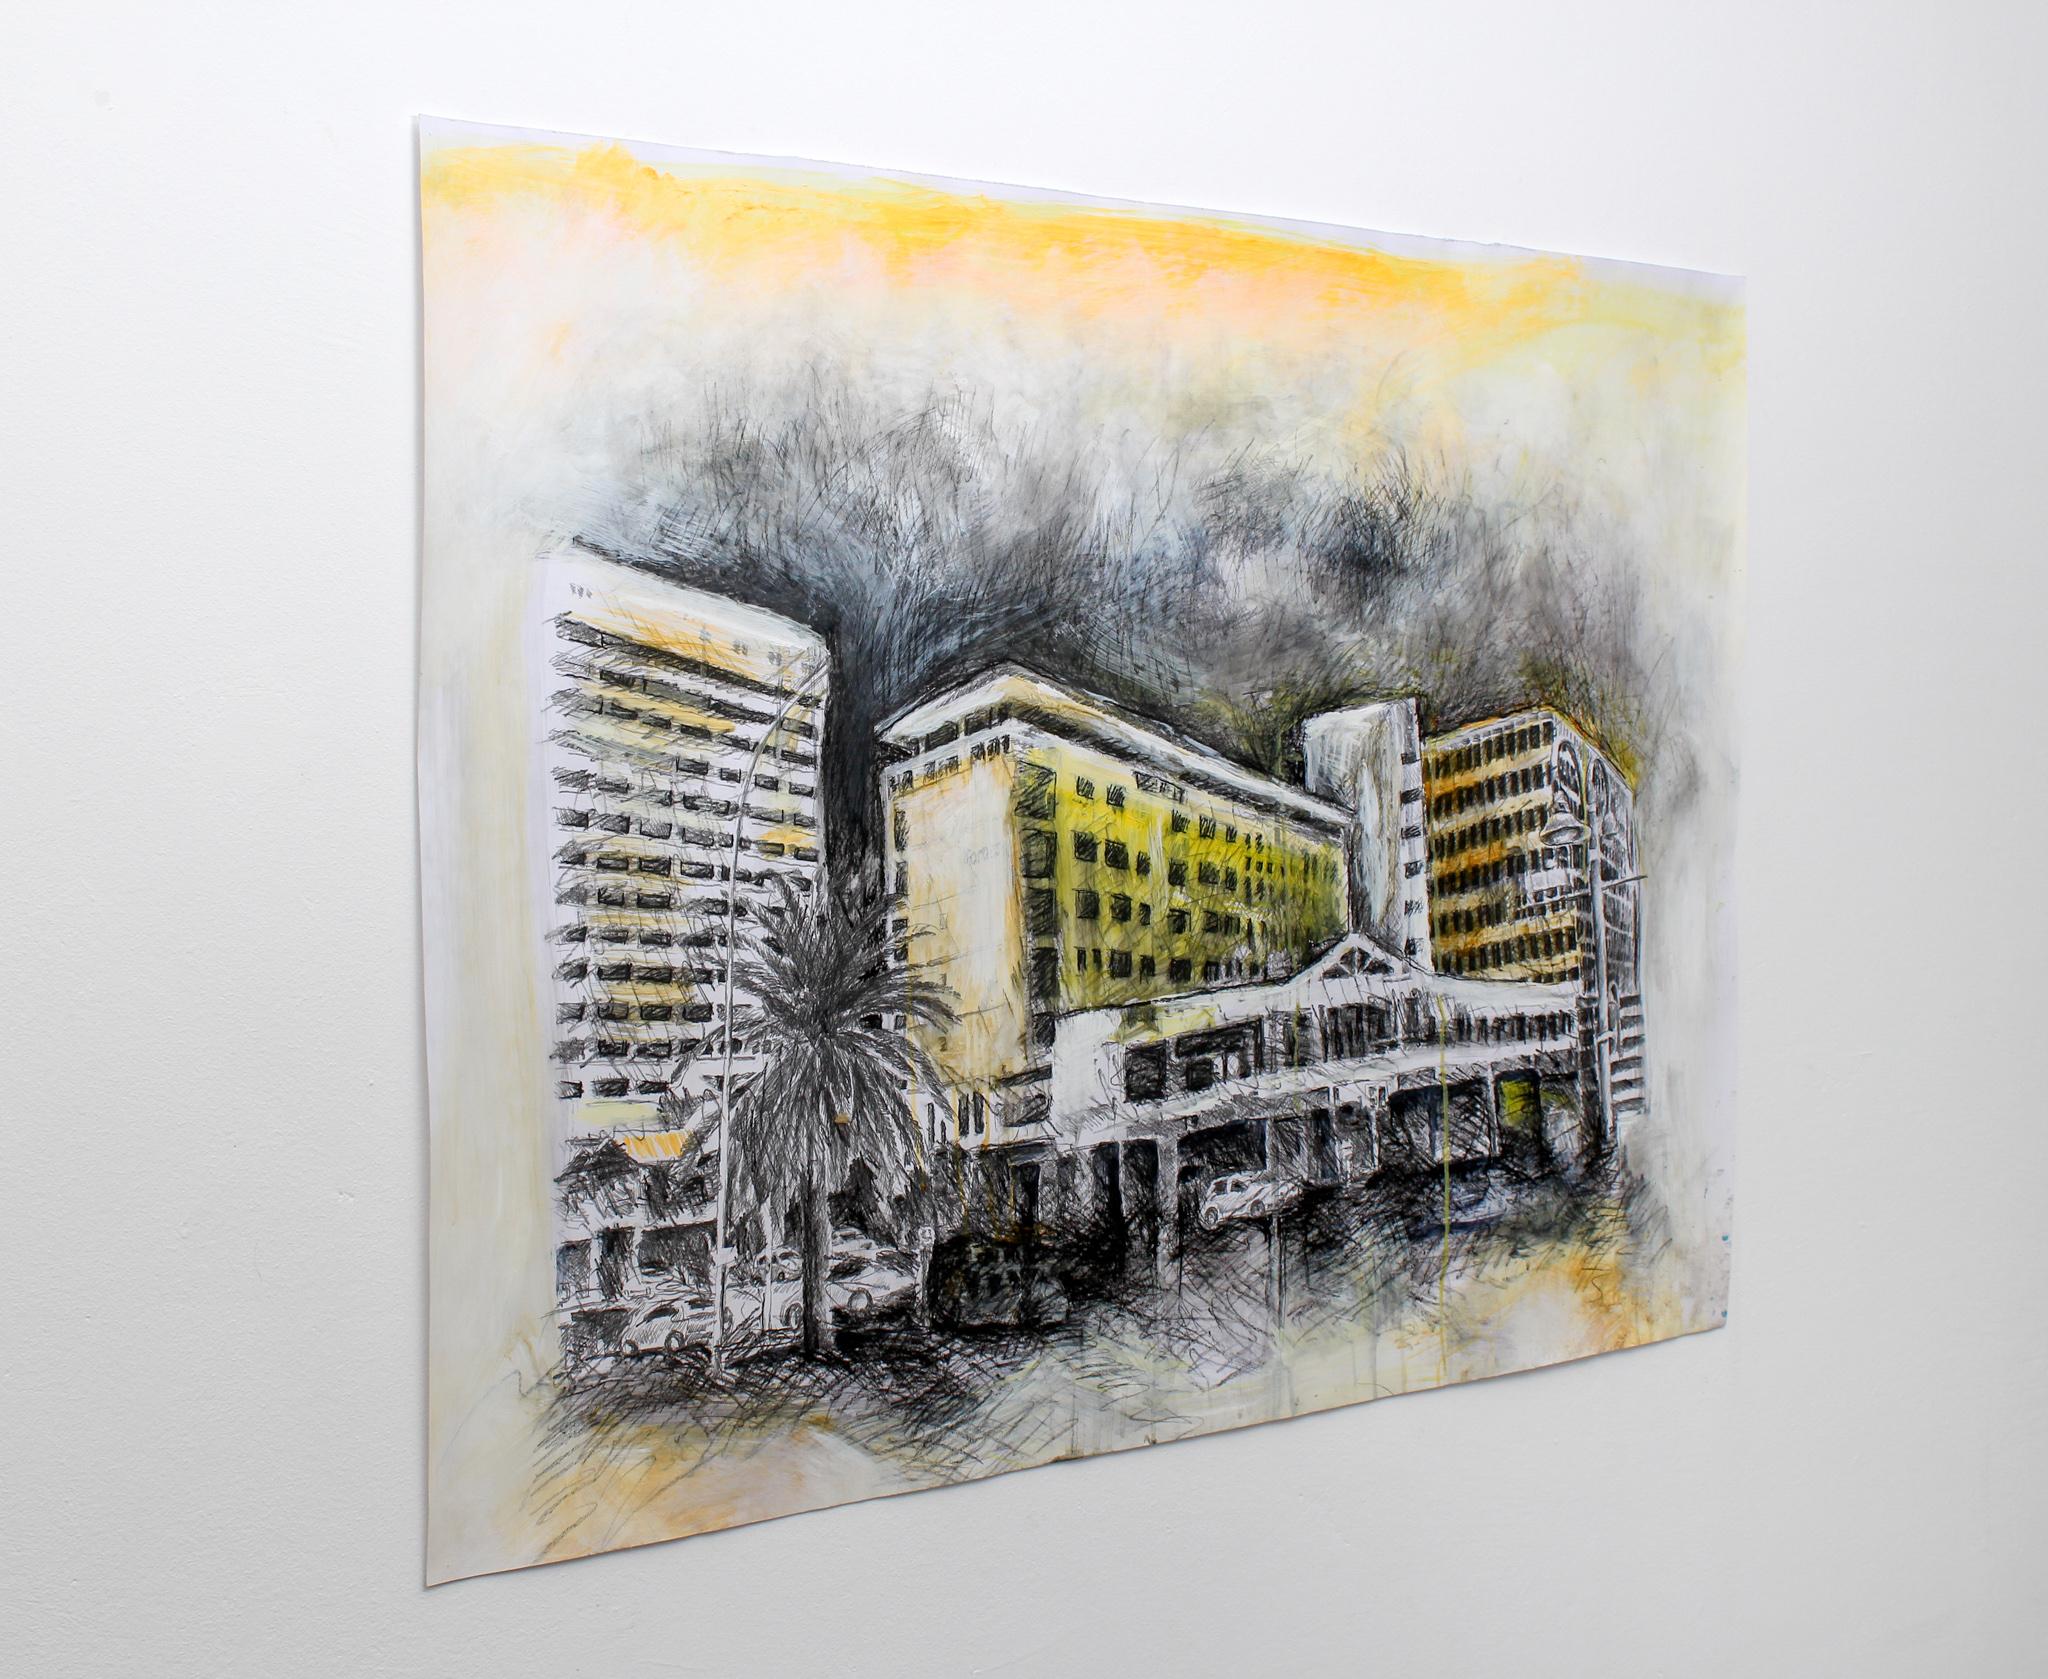 Inflation Growth, 2022. Mixed media: charcoal, pencil, acrylic paint on reclaimed paper

Sheehama graduated from the University of Namibia with a Bachelor of Art (Fine Art) Honours degree in 2010 and has taught Visual Arts at the John Muafangejo